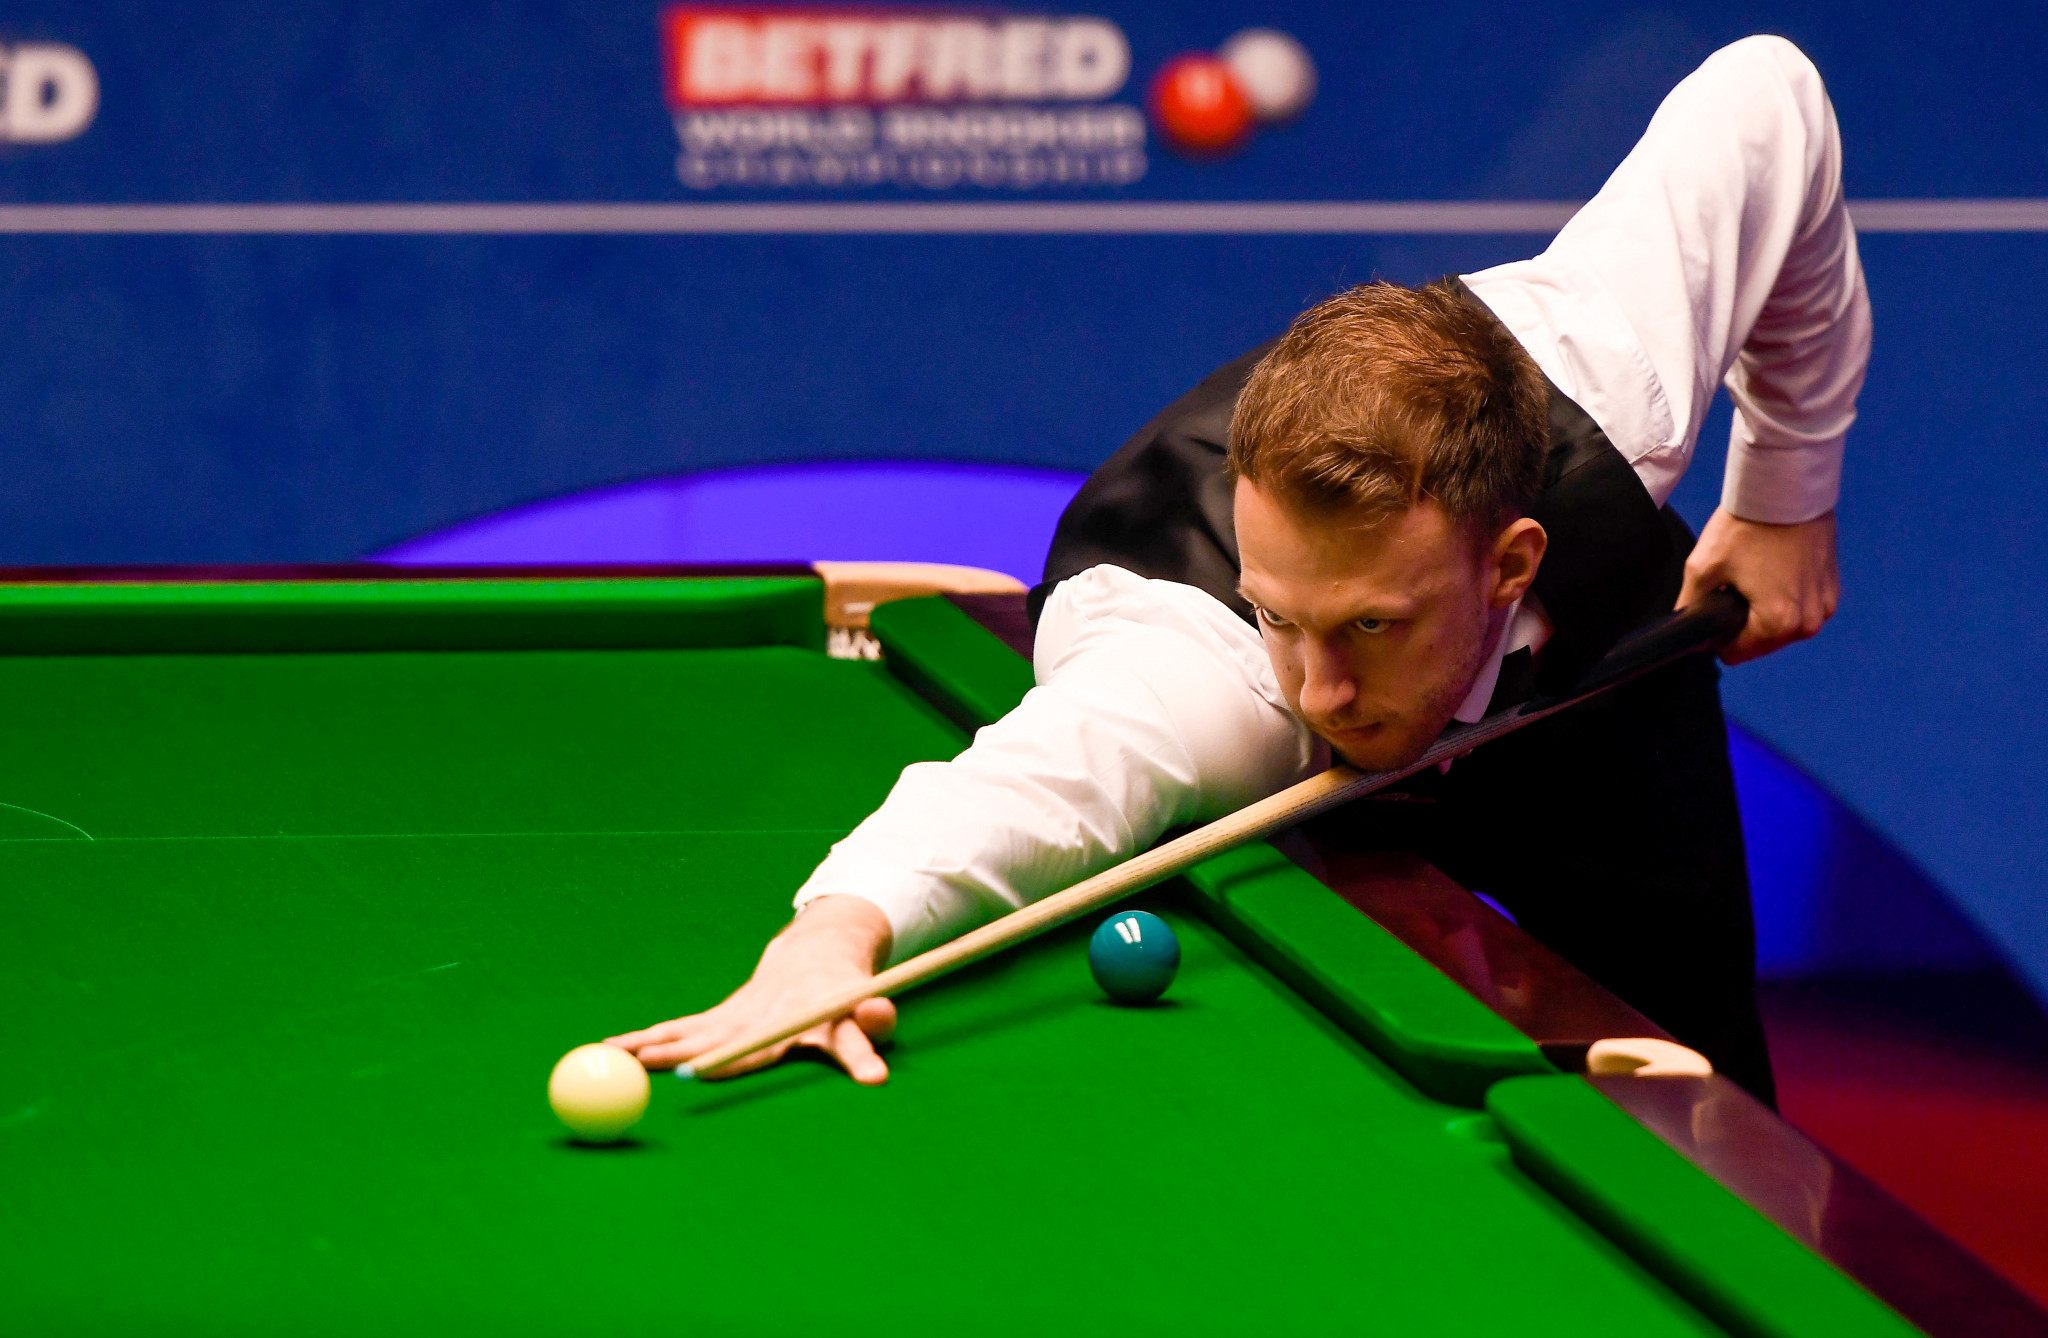 England's Judd Trump is one win away from reaching the final ©Getty Images